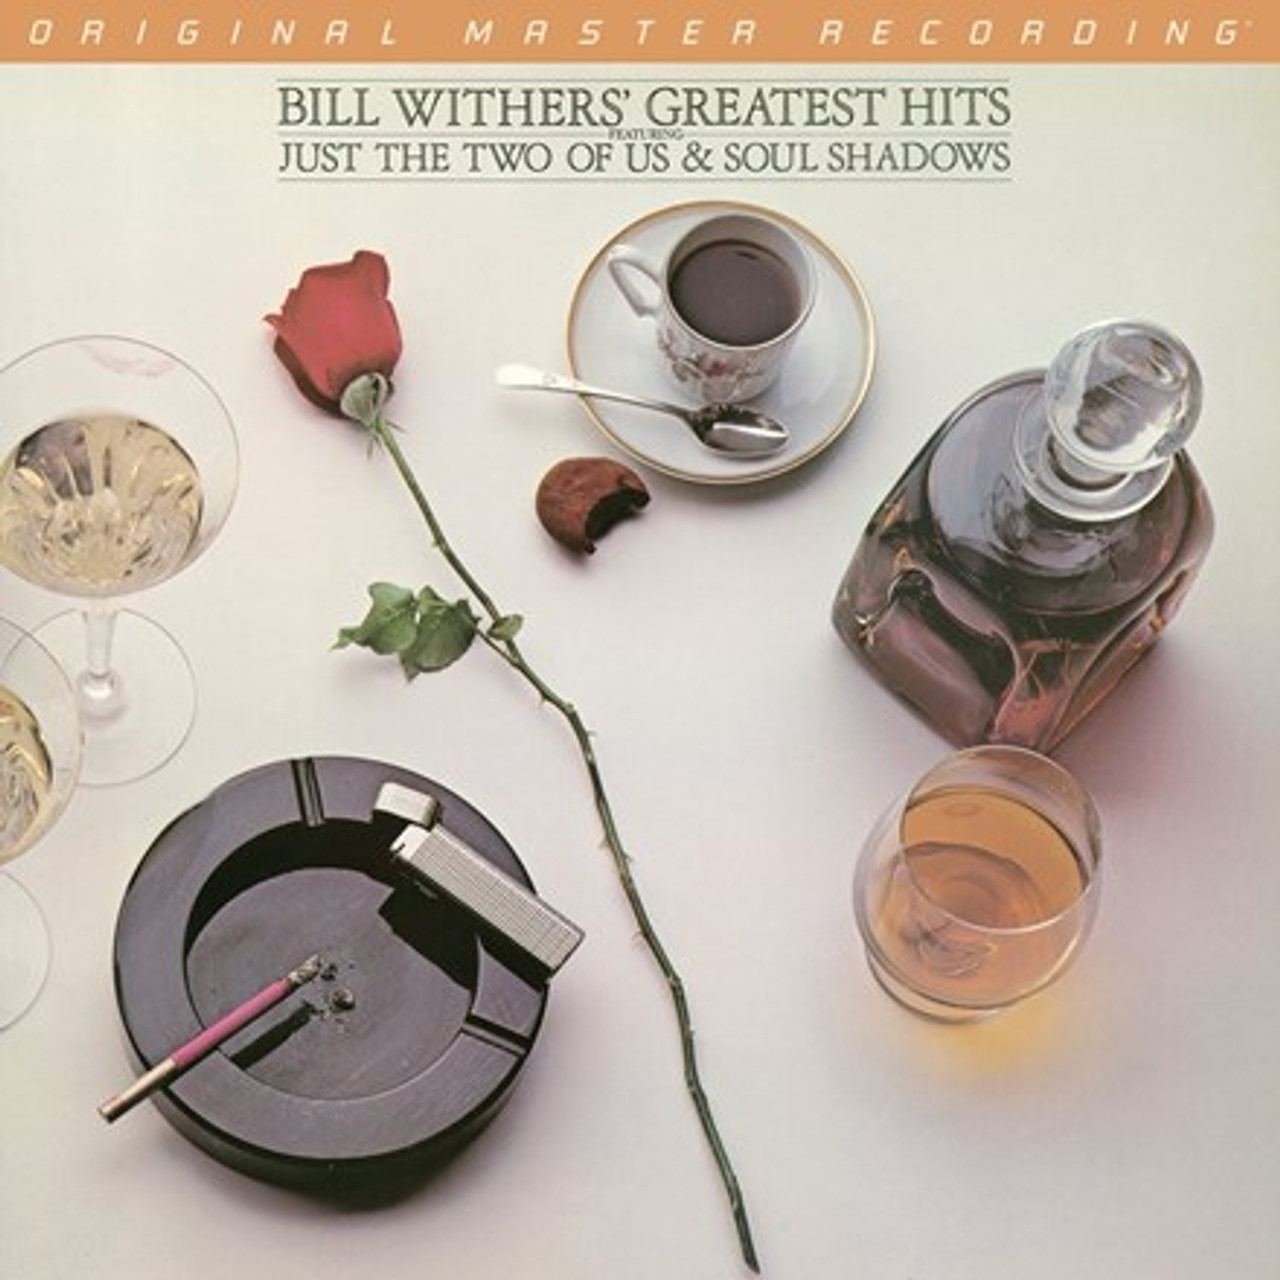 Bill Withers - Bill Withers' Greatest Hits (Numbered 180g Vinyl LP)